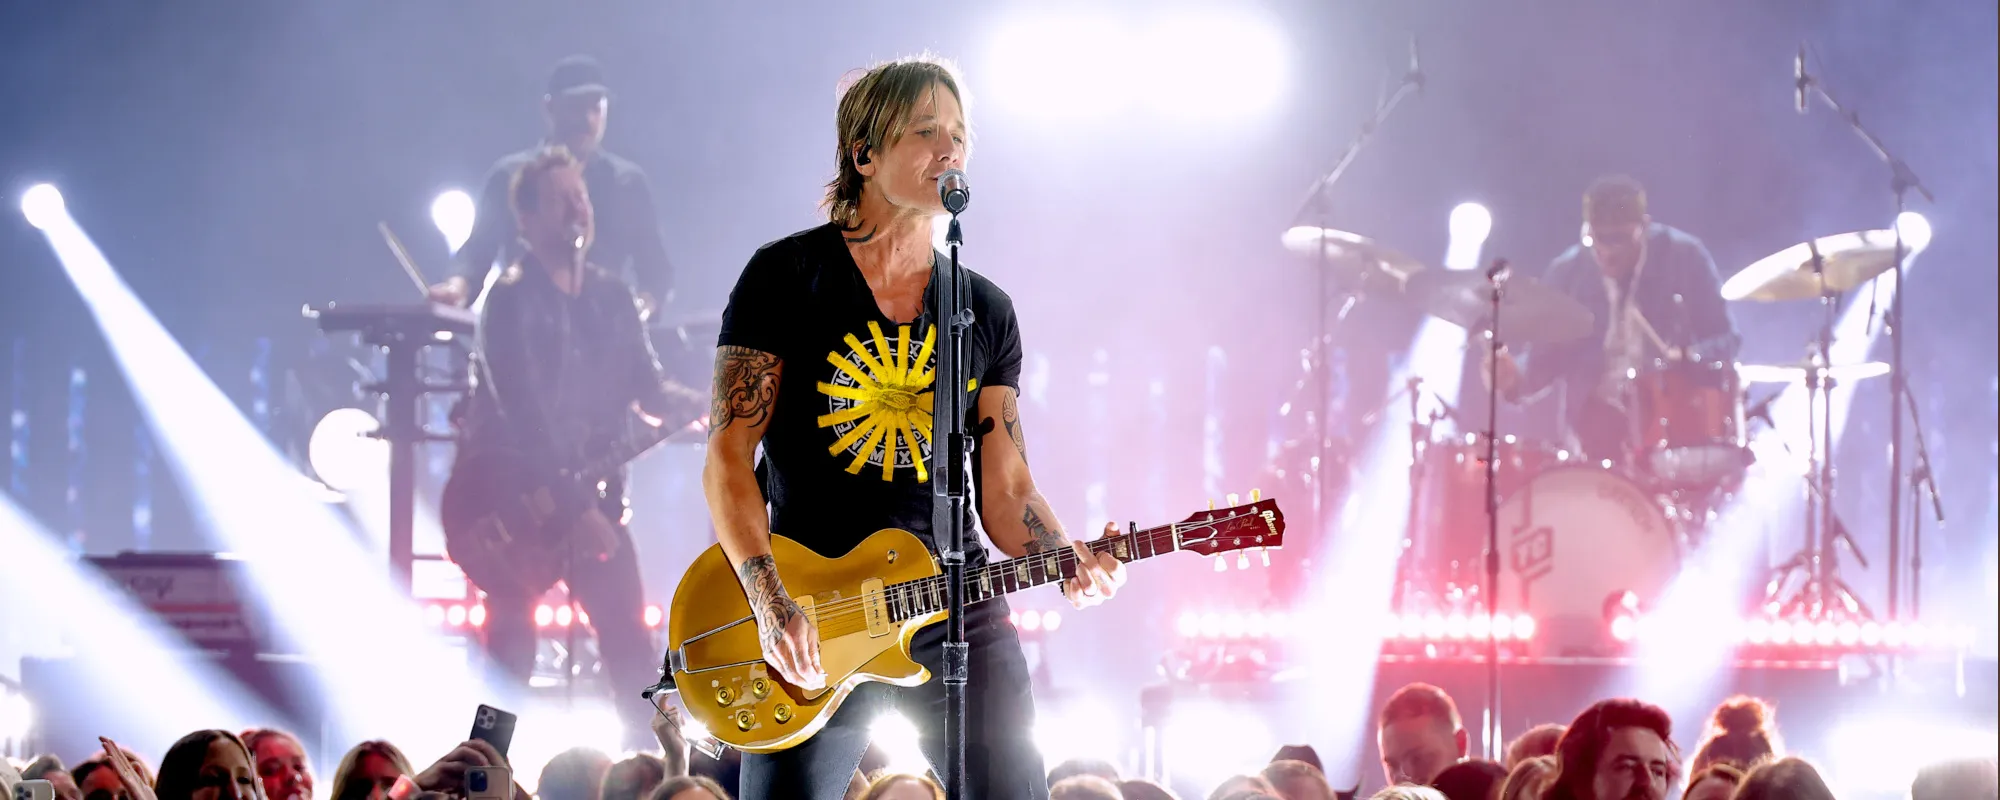 Keith Urban Leads Lineup for ‘All For the Hall’ Benefit Concert